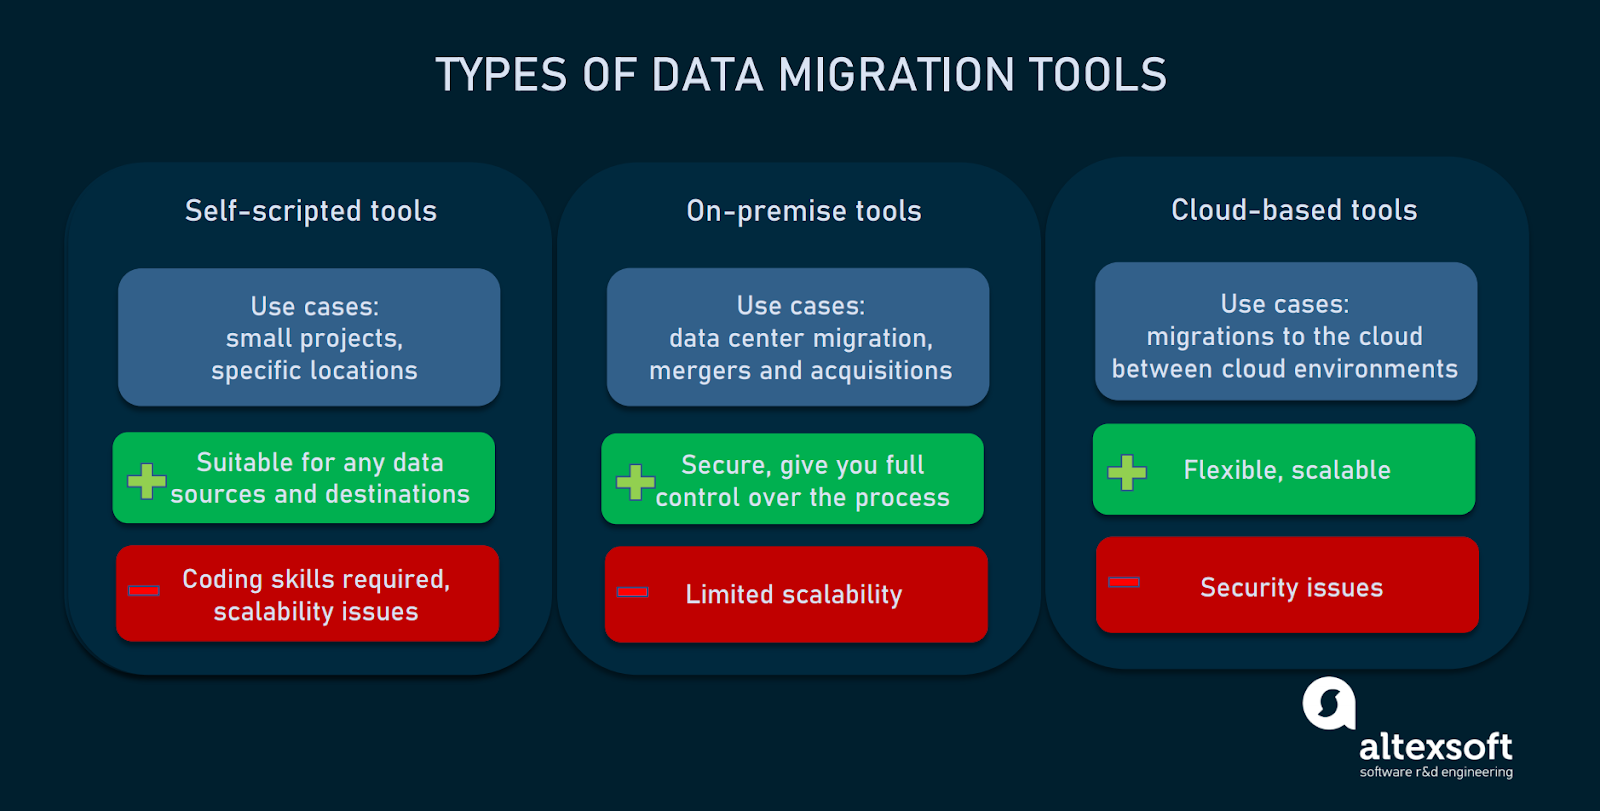 Types of Data Migration Tools